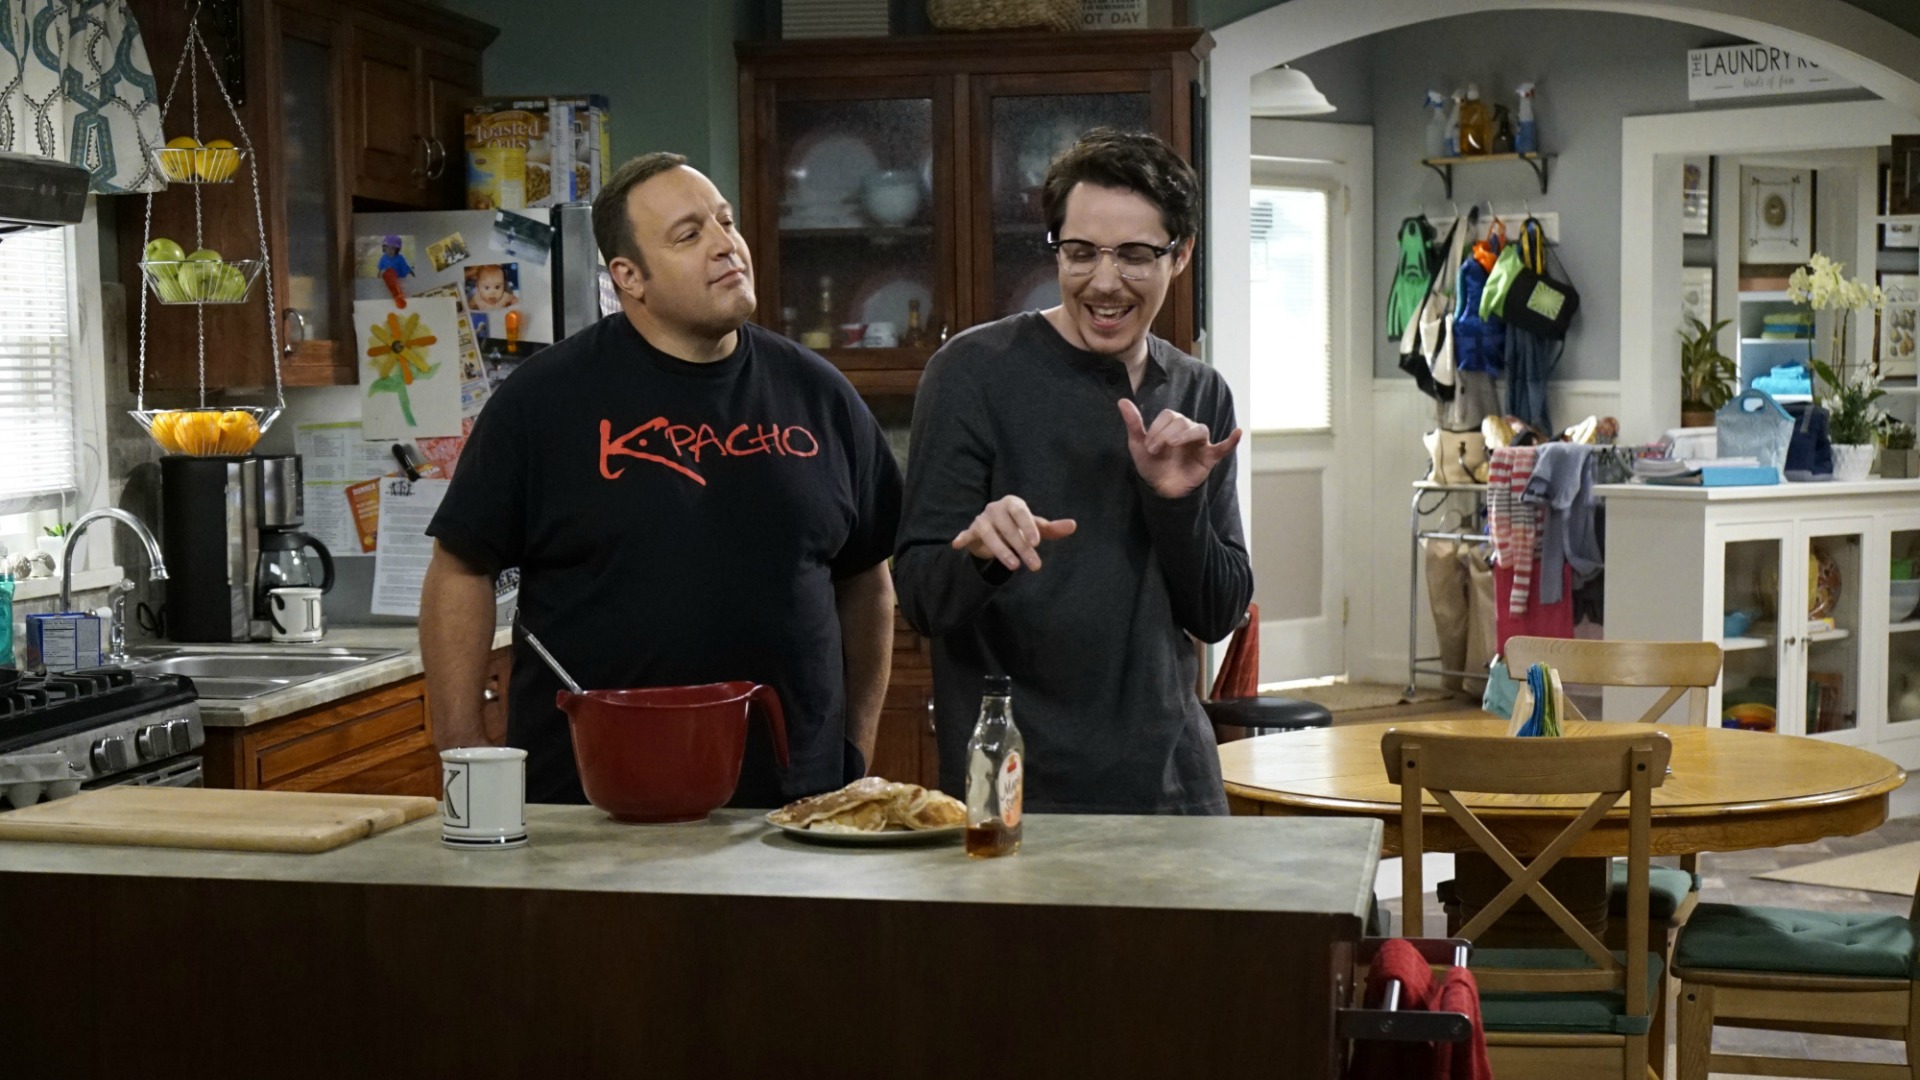 Brum actor Ryan Cartwright stars in new US sitcom ‘Kevin Can Wait’